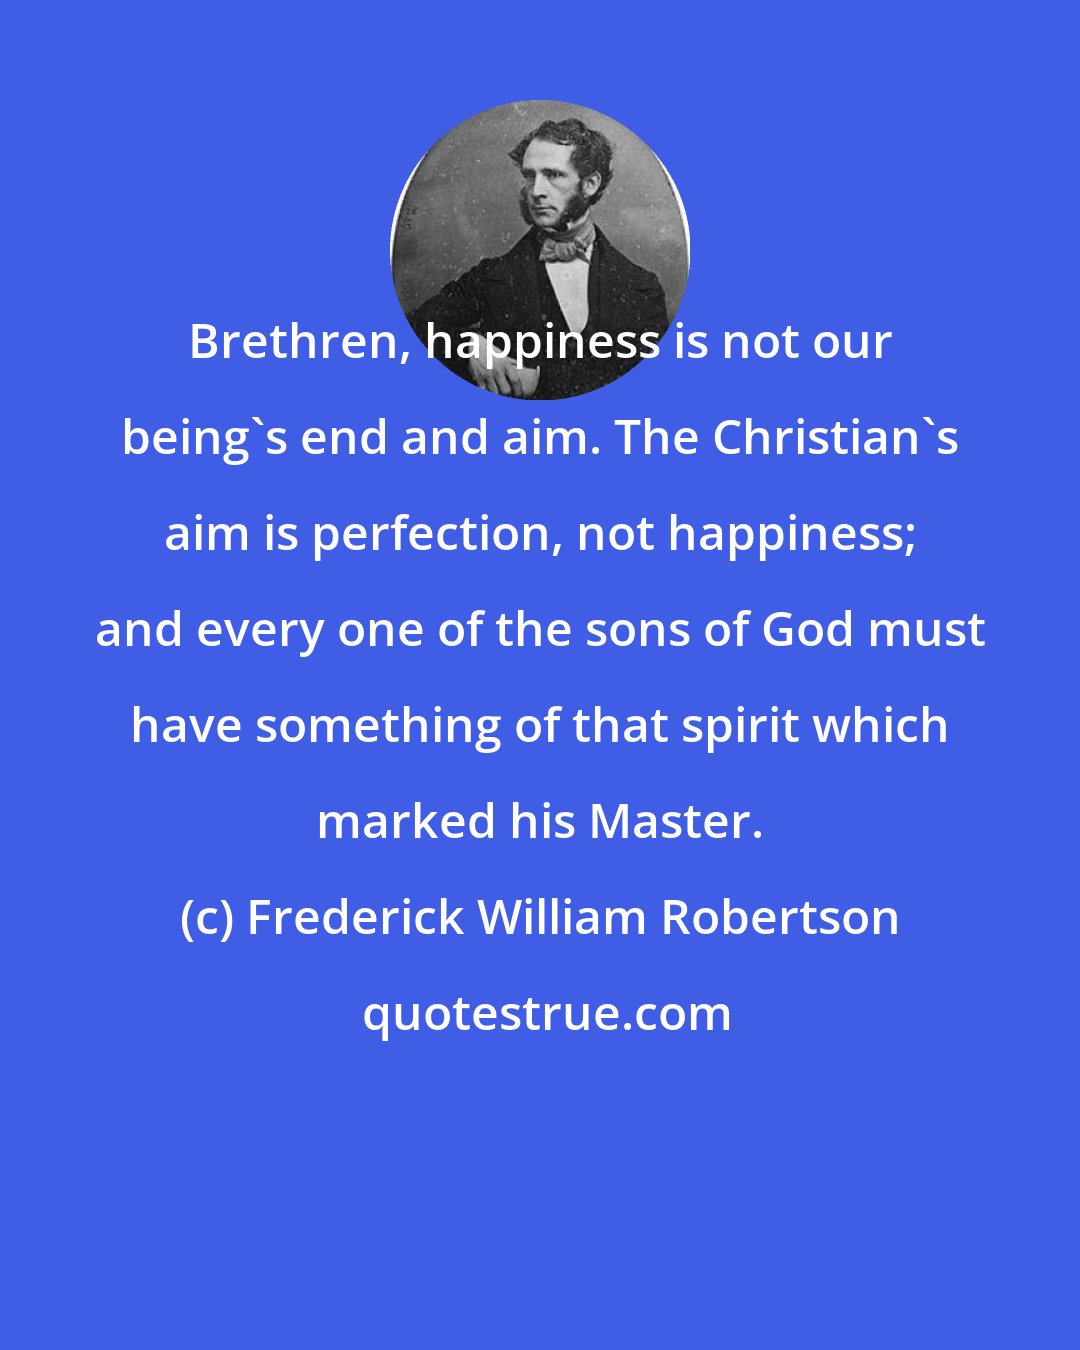 Frederick William Robertson: Brethren, happiness is not our being's end and aim. The Christian's aim is perfection, not happiness; and every one of the sons of God must have something of that spirit which marked his Master.